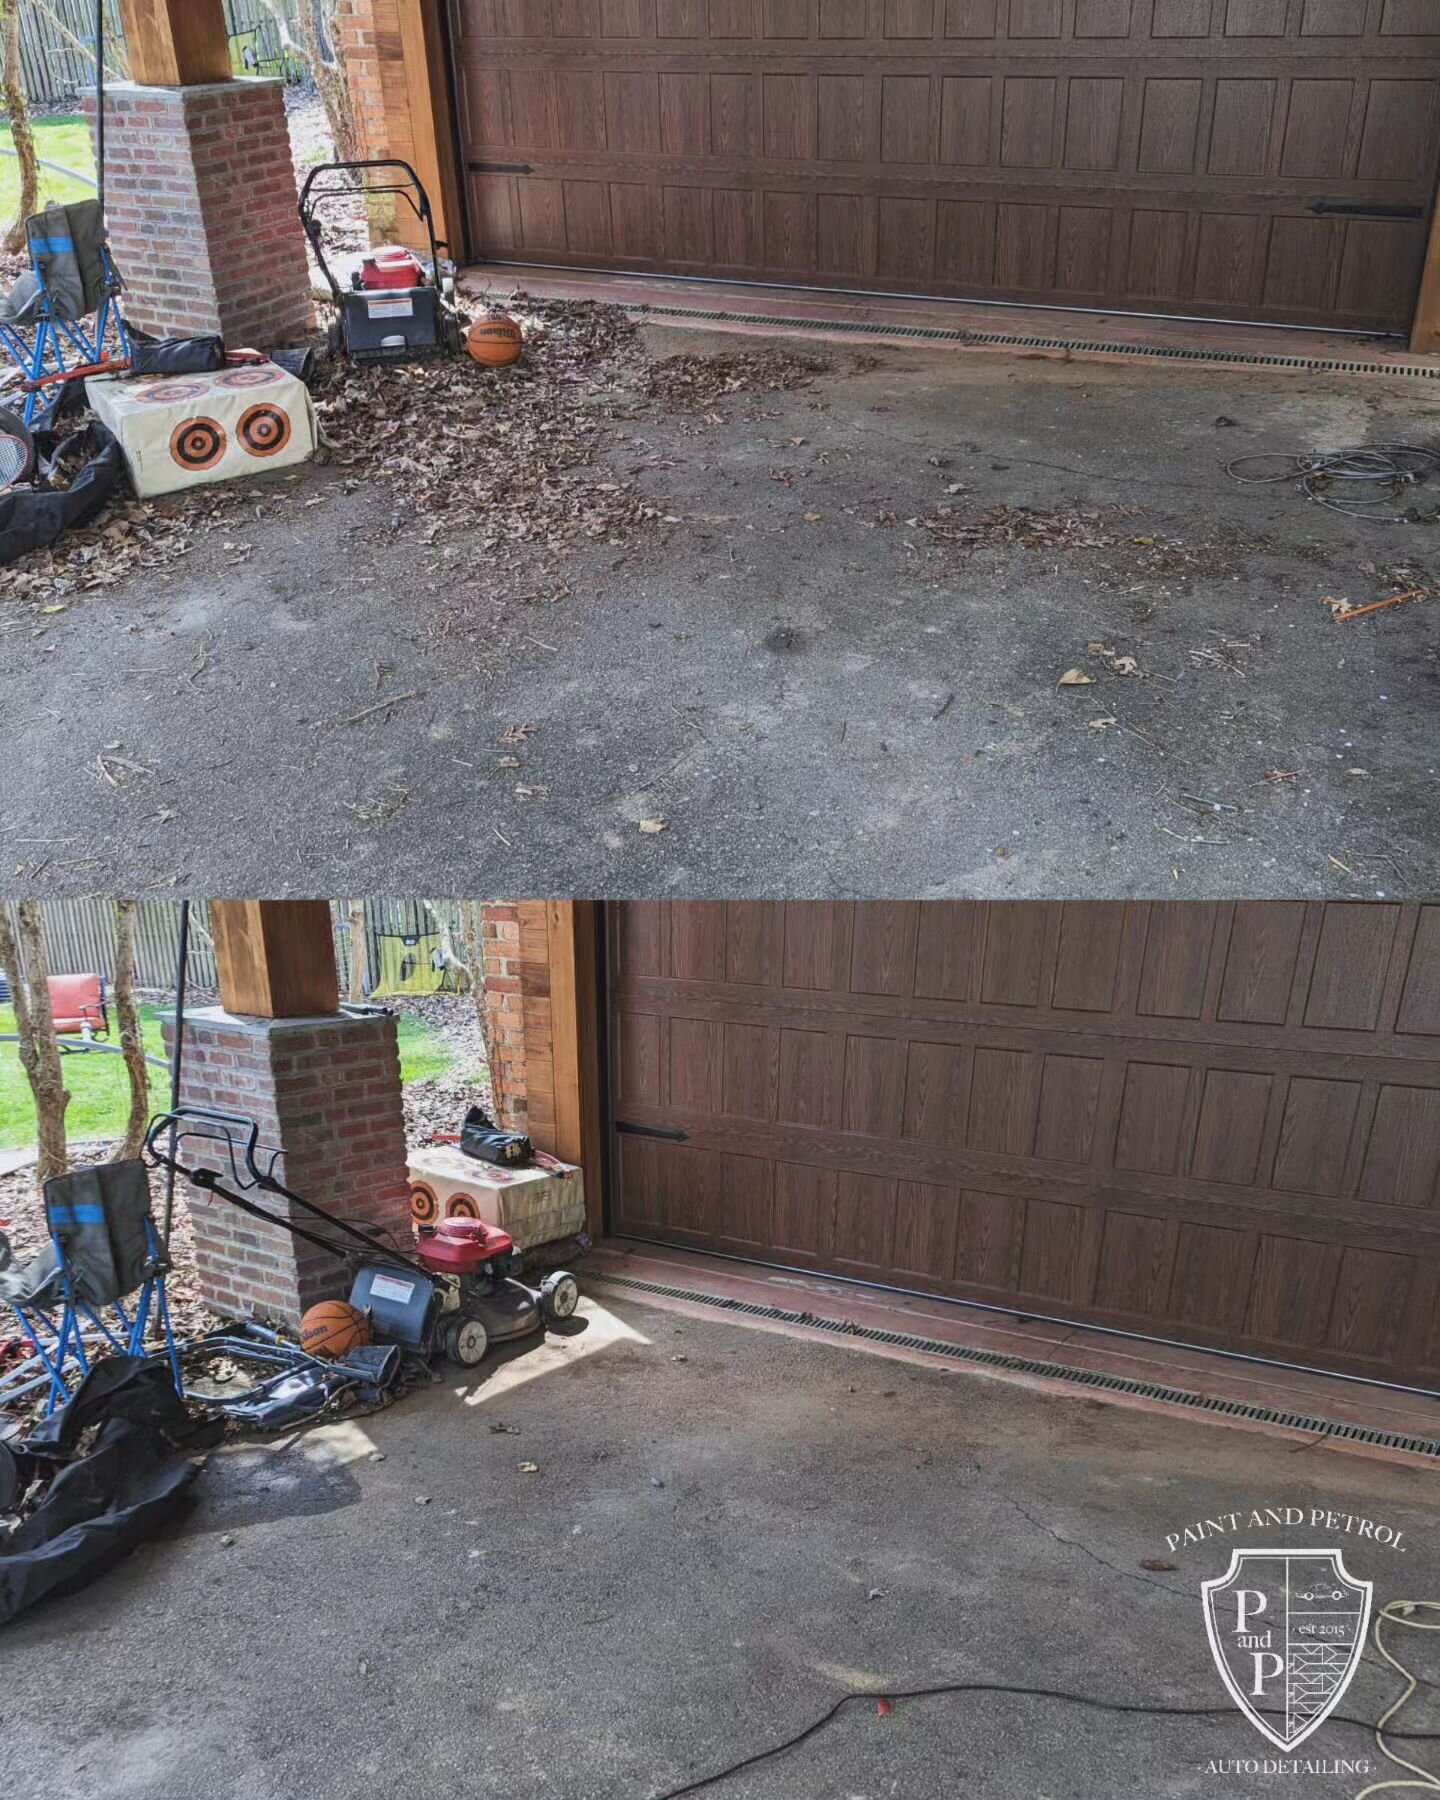 It doesn't take a ton of effort to add value to your product. In this case it helps me as much as the client. I spent about 5 minutes blowing leaves out from the front of the garage and organized some loose items. For me, it's important to try and le